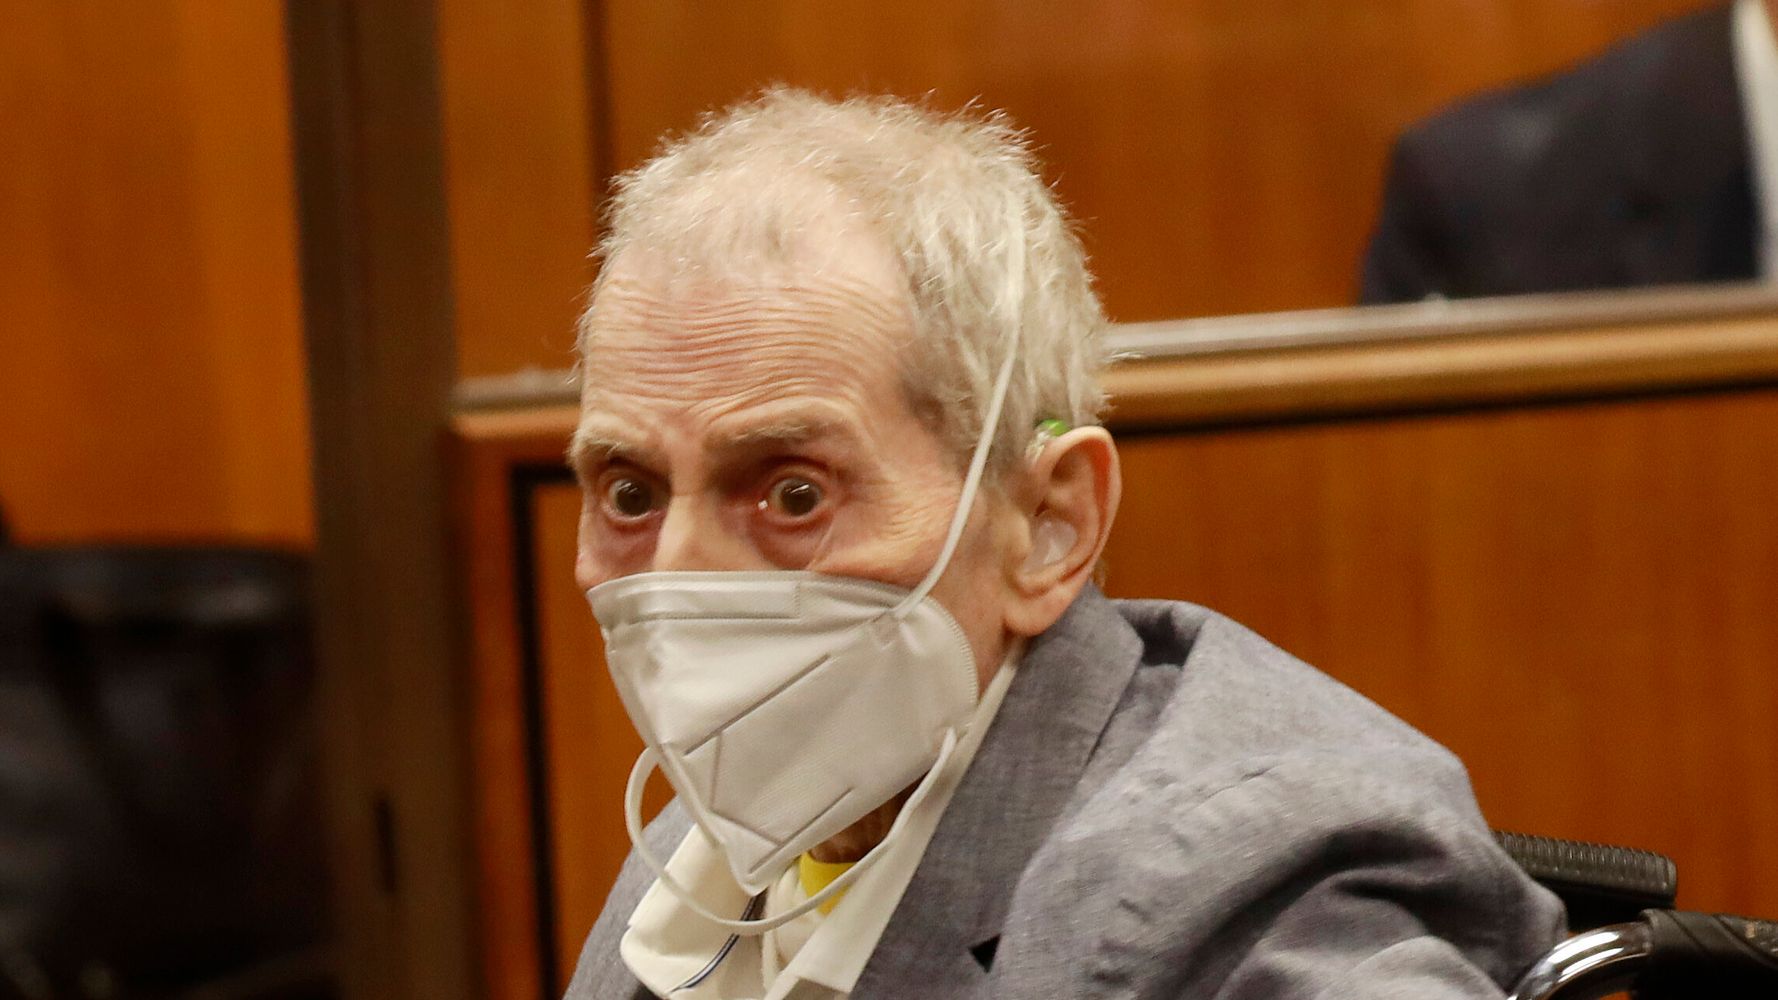 Robert Durst Sentenced To Life Behind Bars For 2000 Murder Of Friend